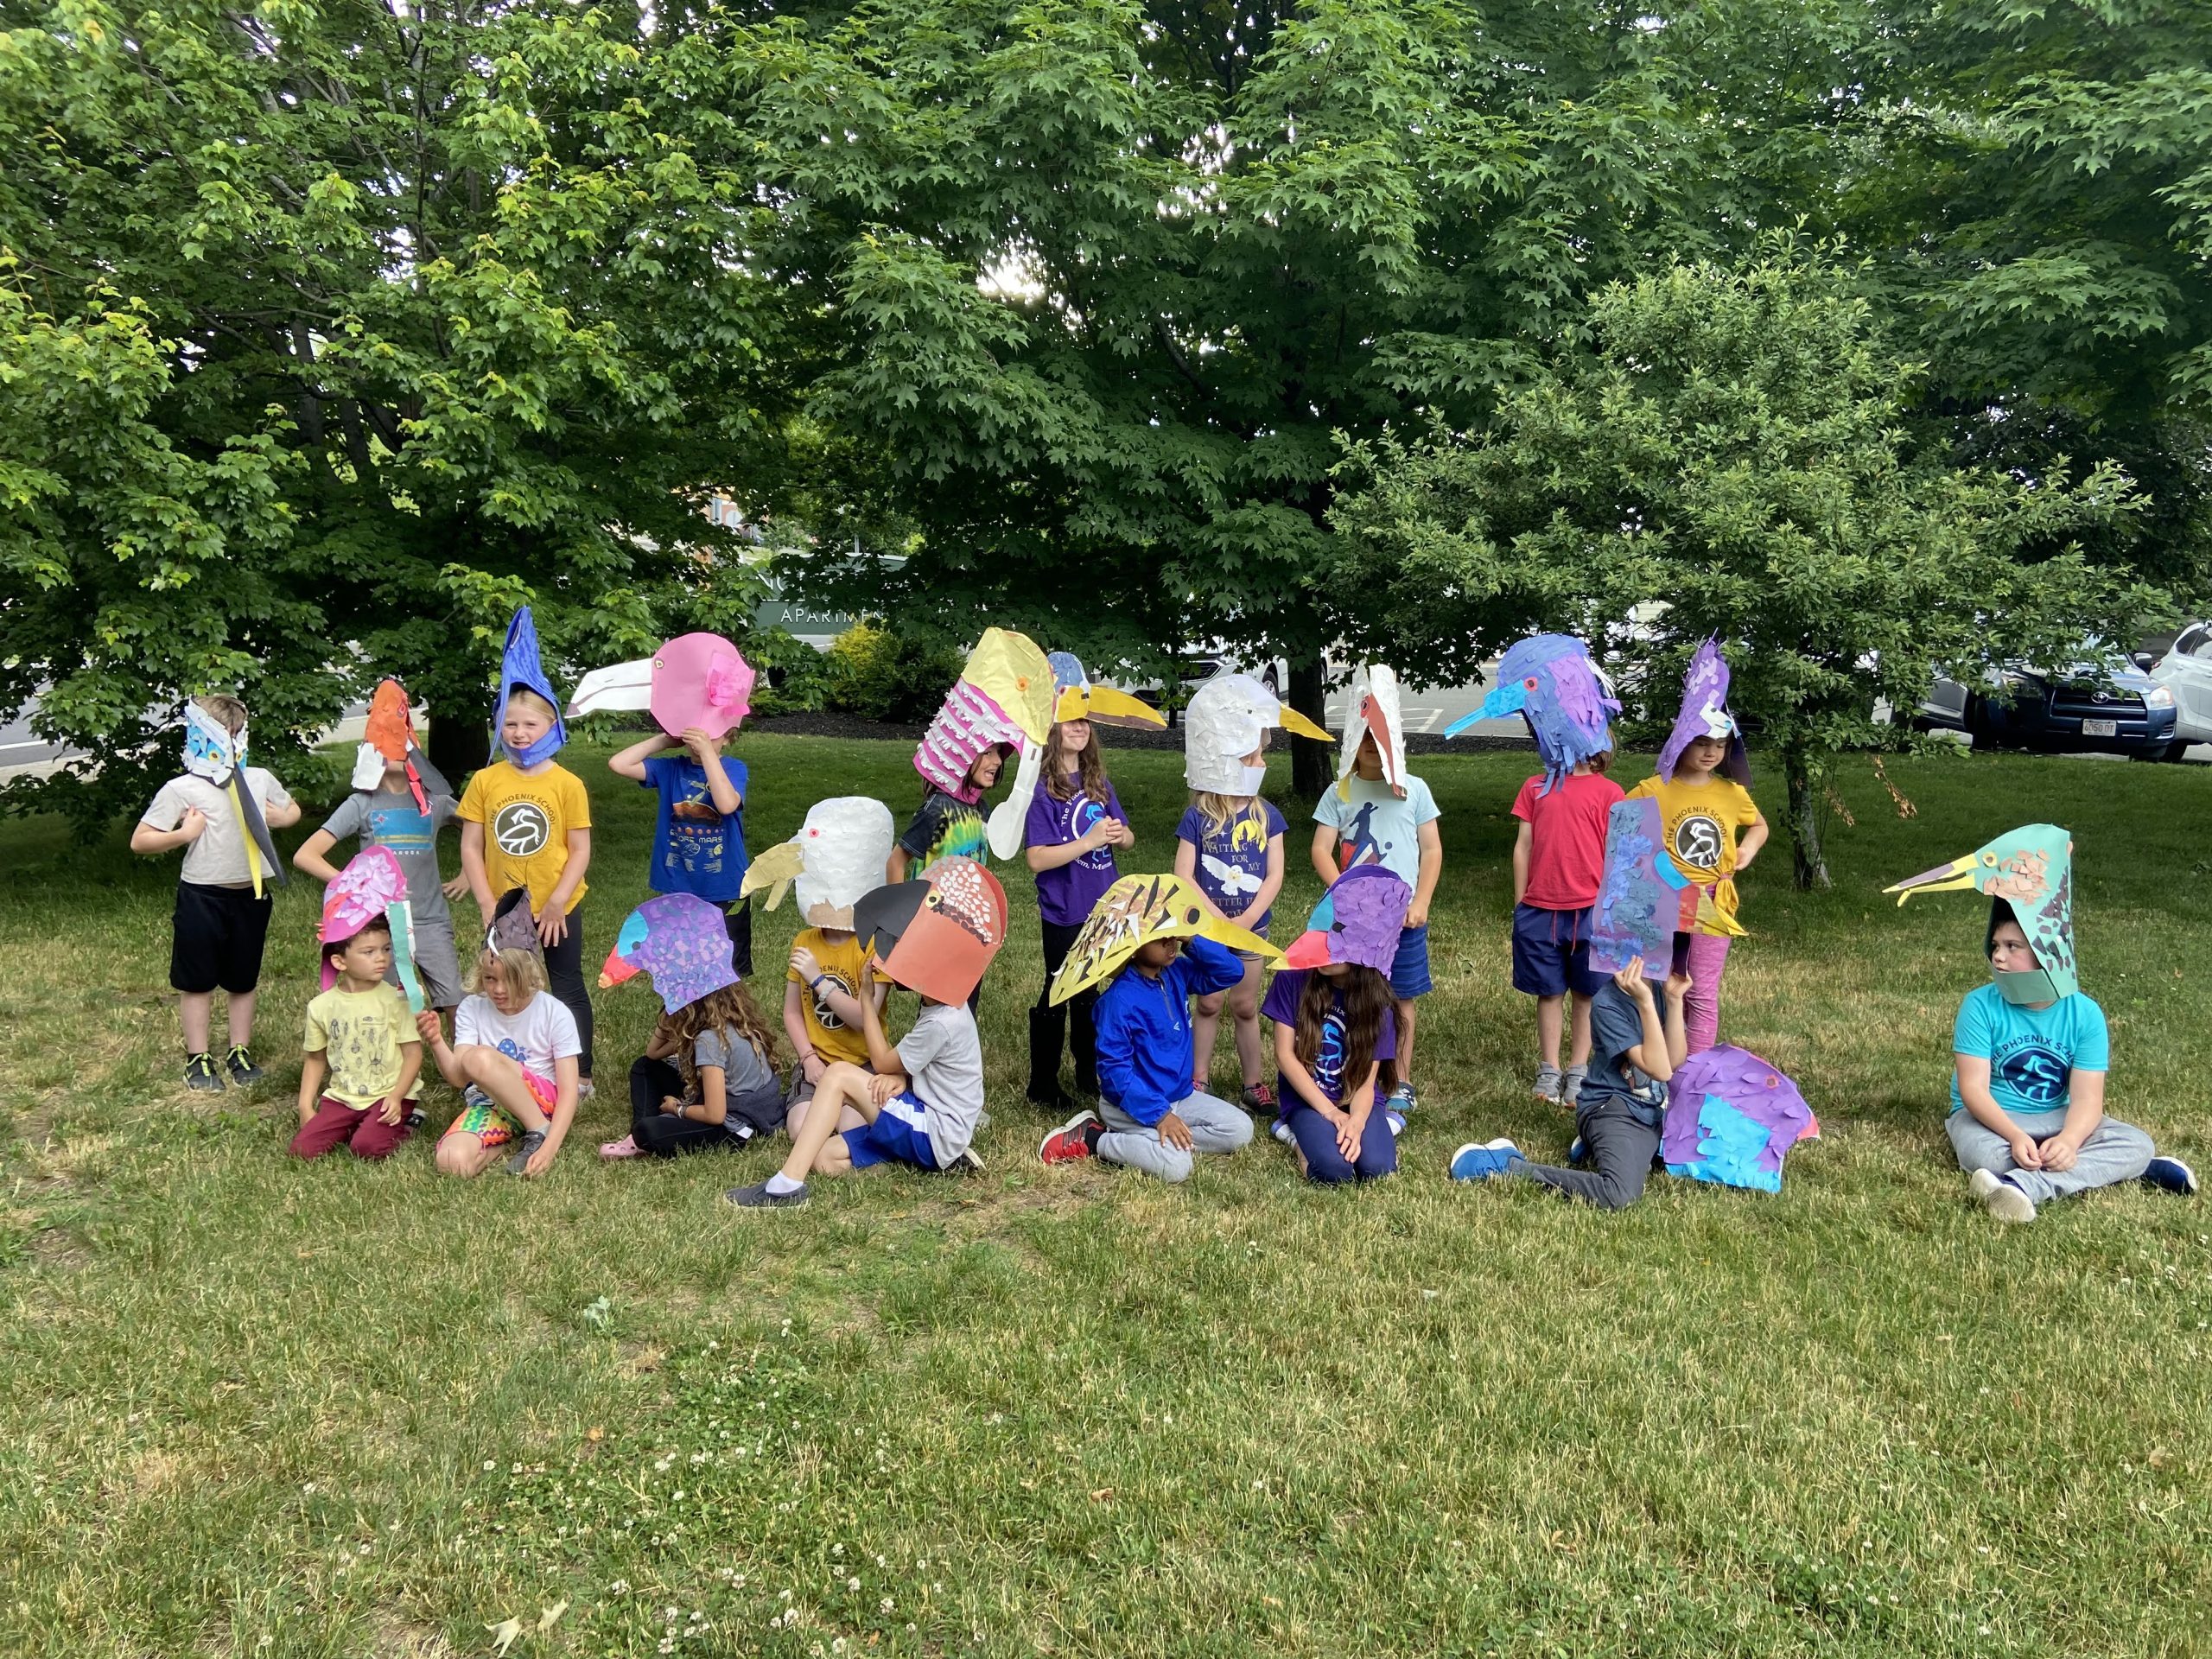 A group of children sit in the grass outside holding handmade art